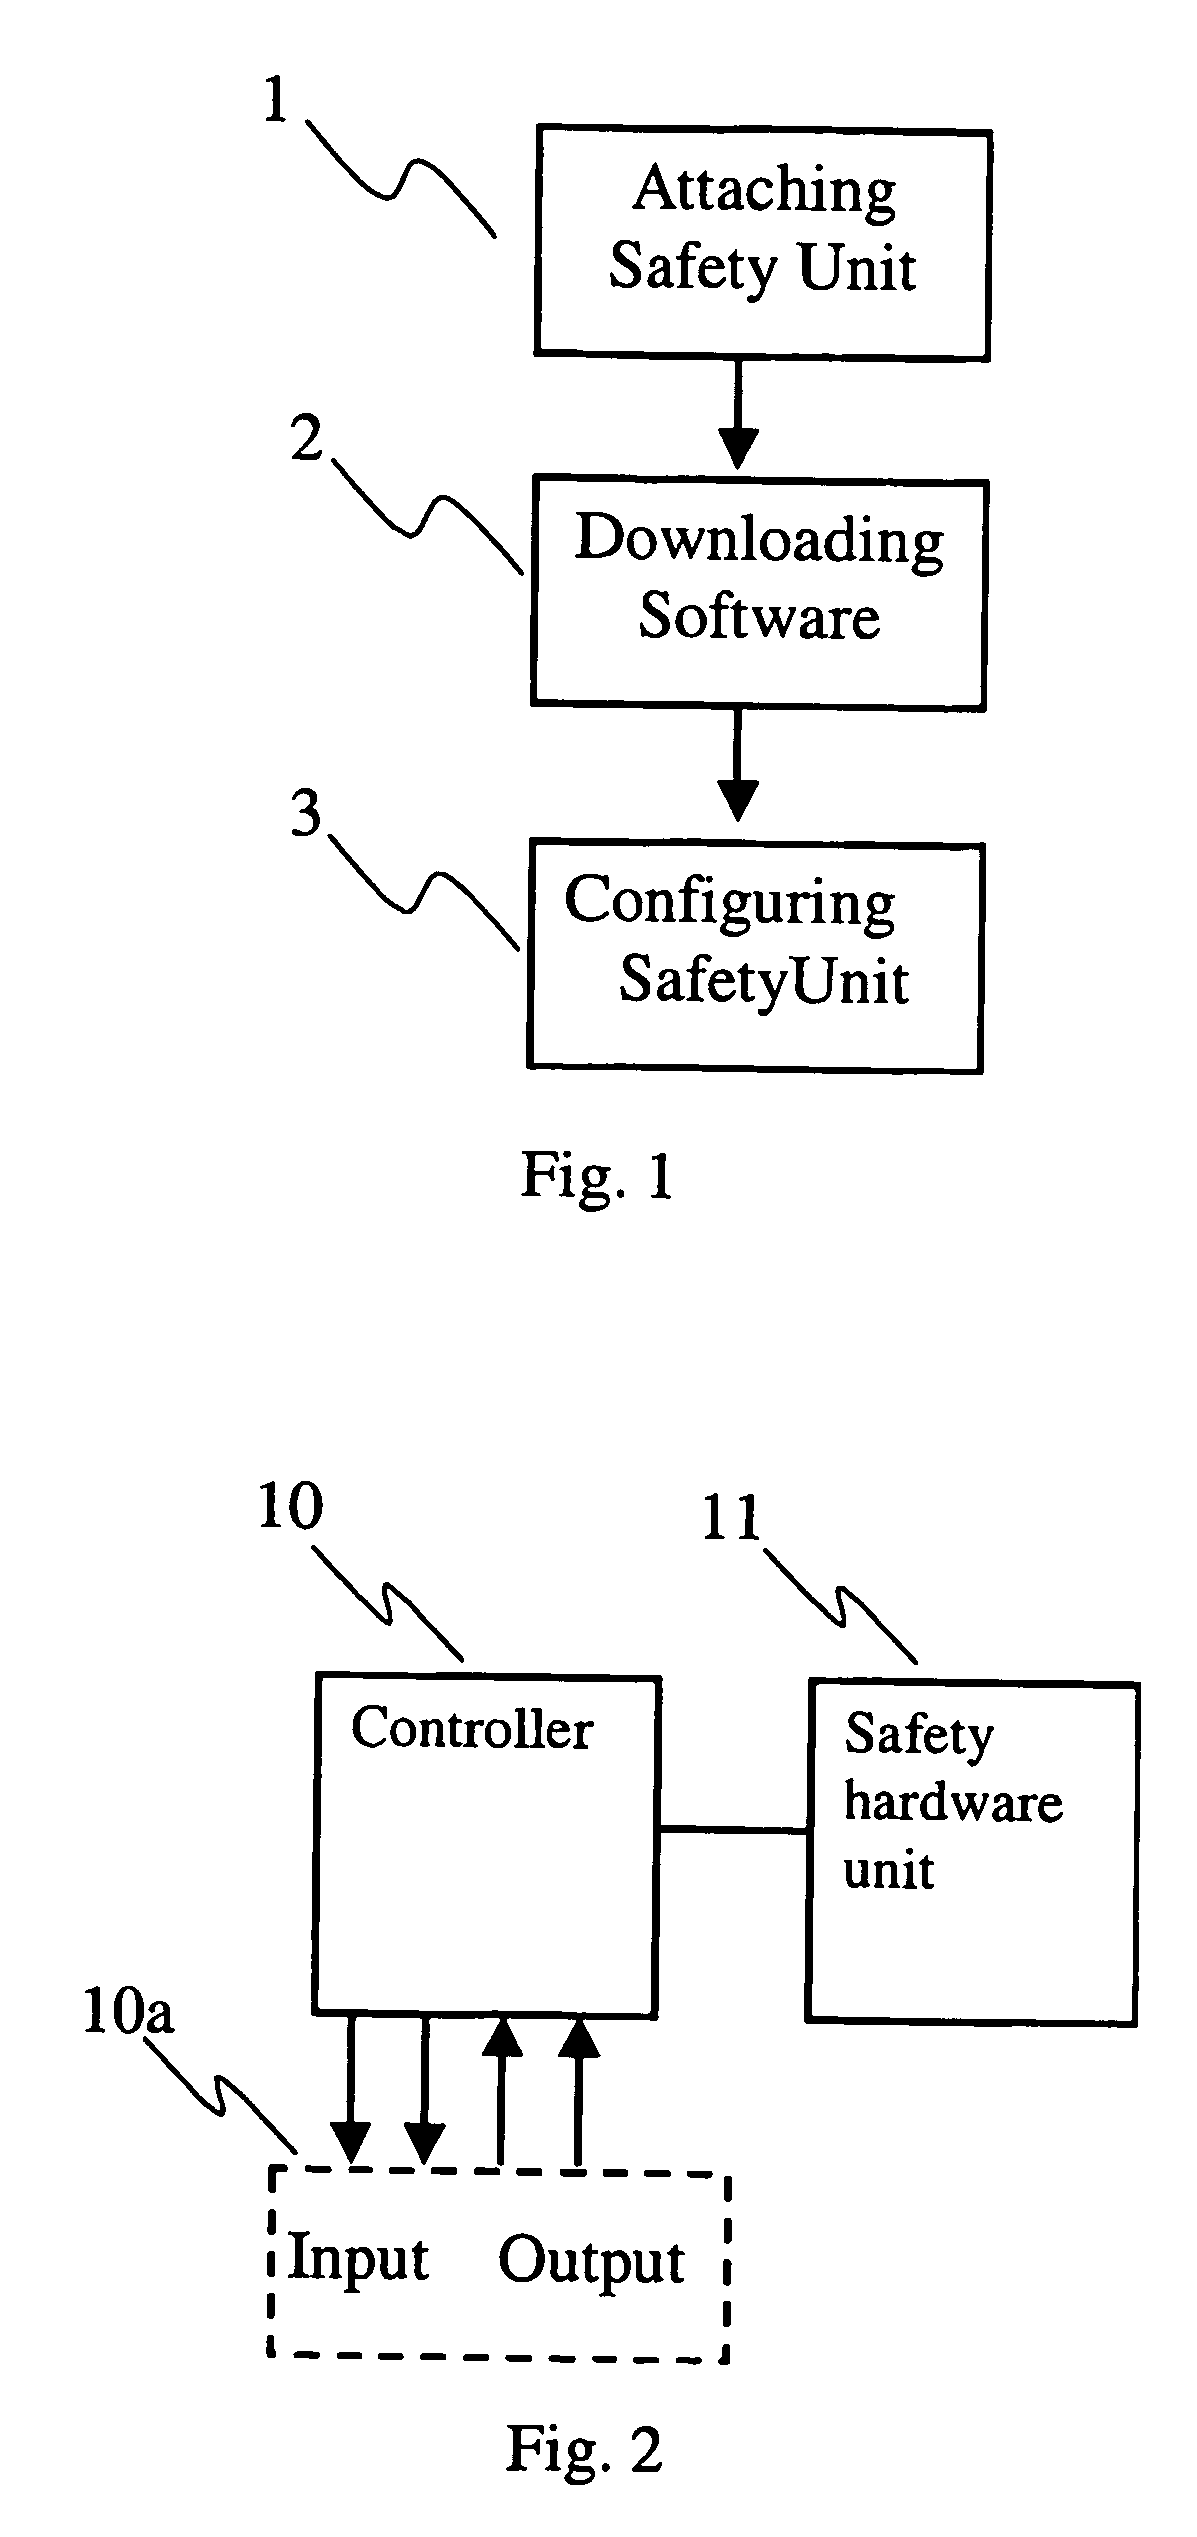 Method to increase the safety integrity level of a control system